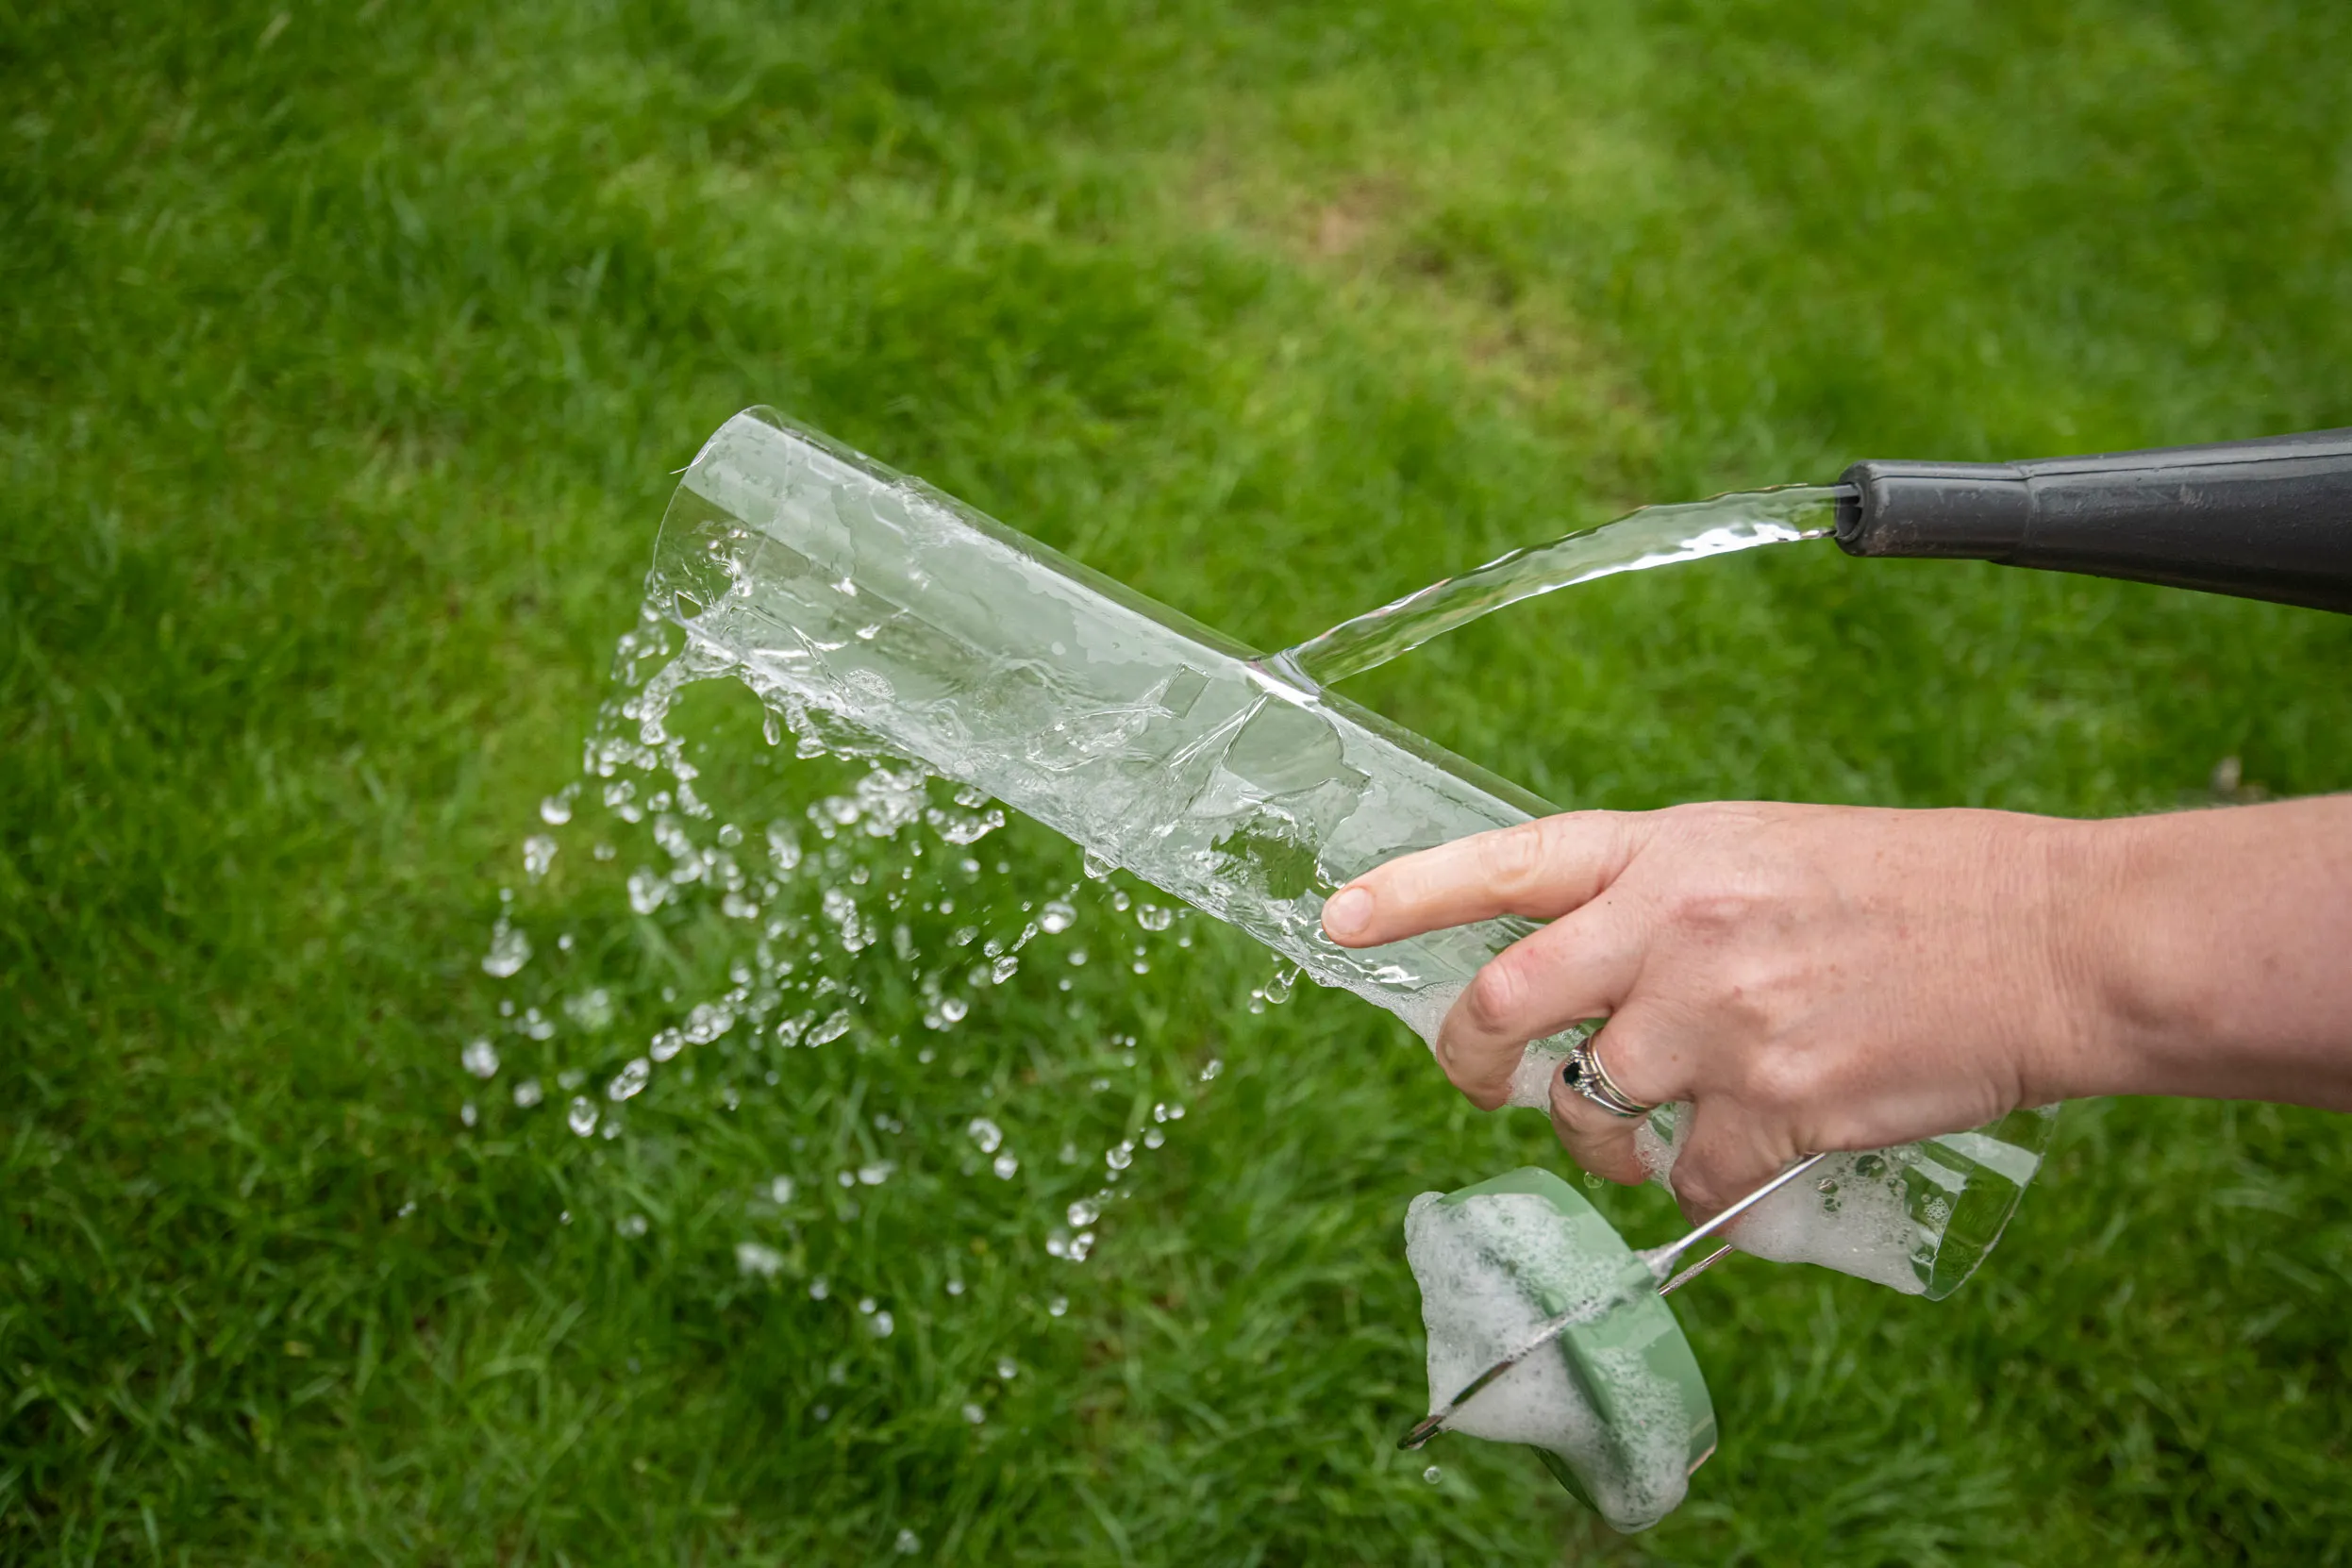 The view of a persons hand rinsing their bird feeder with a watering can over grass.